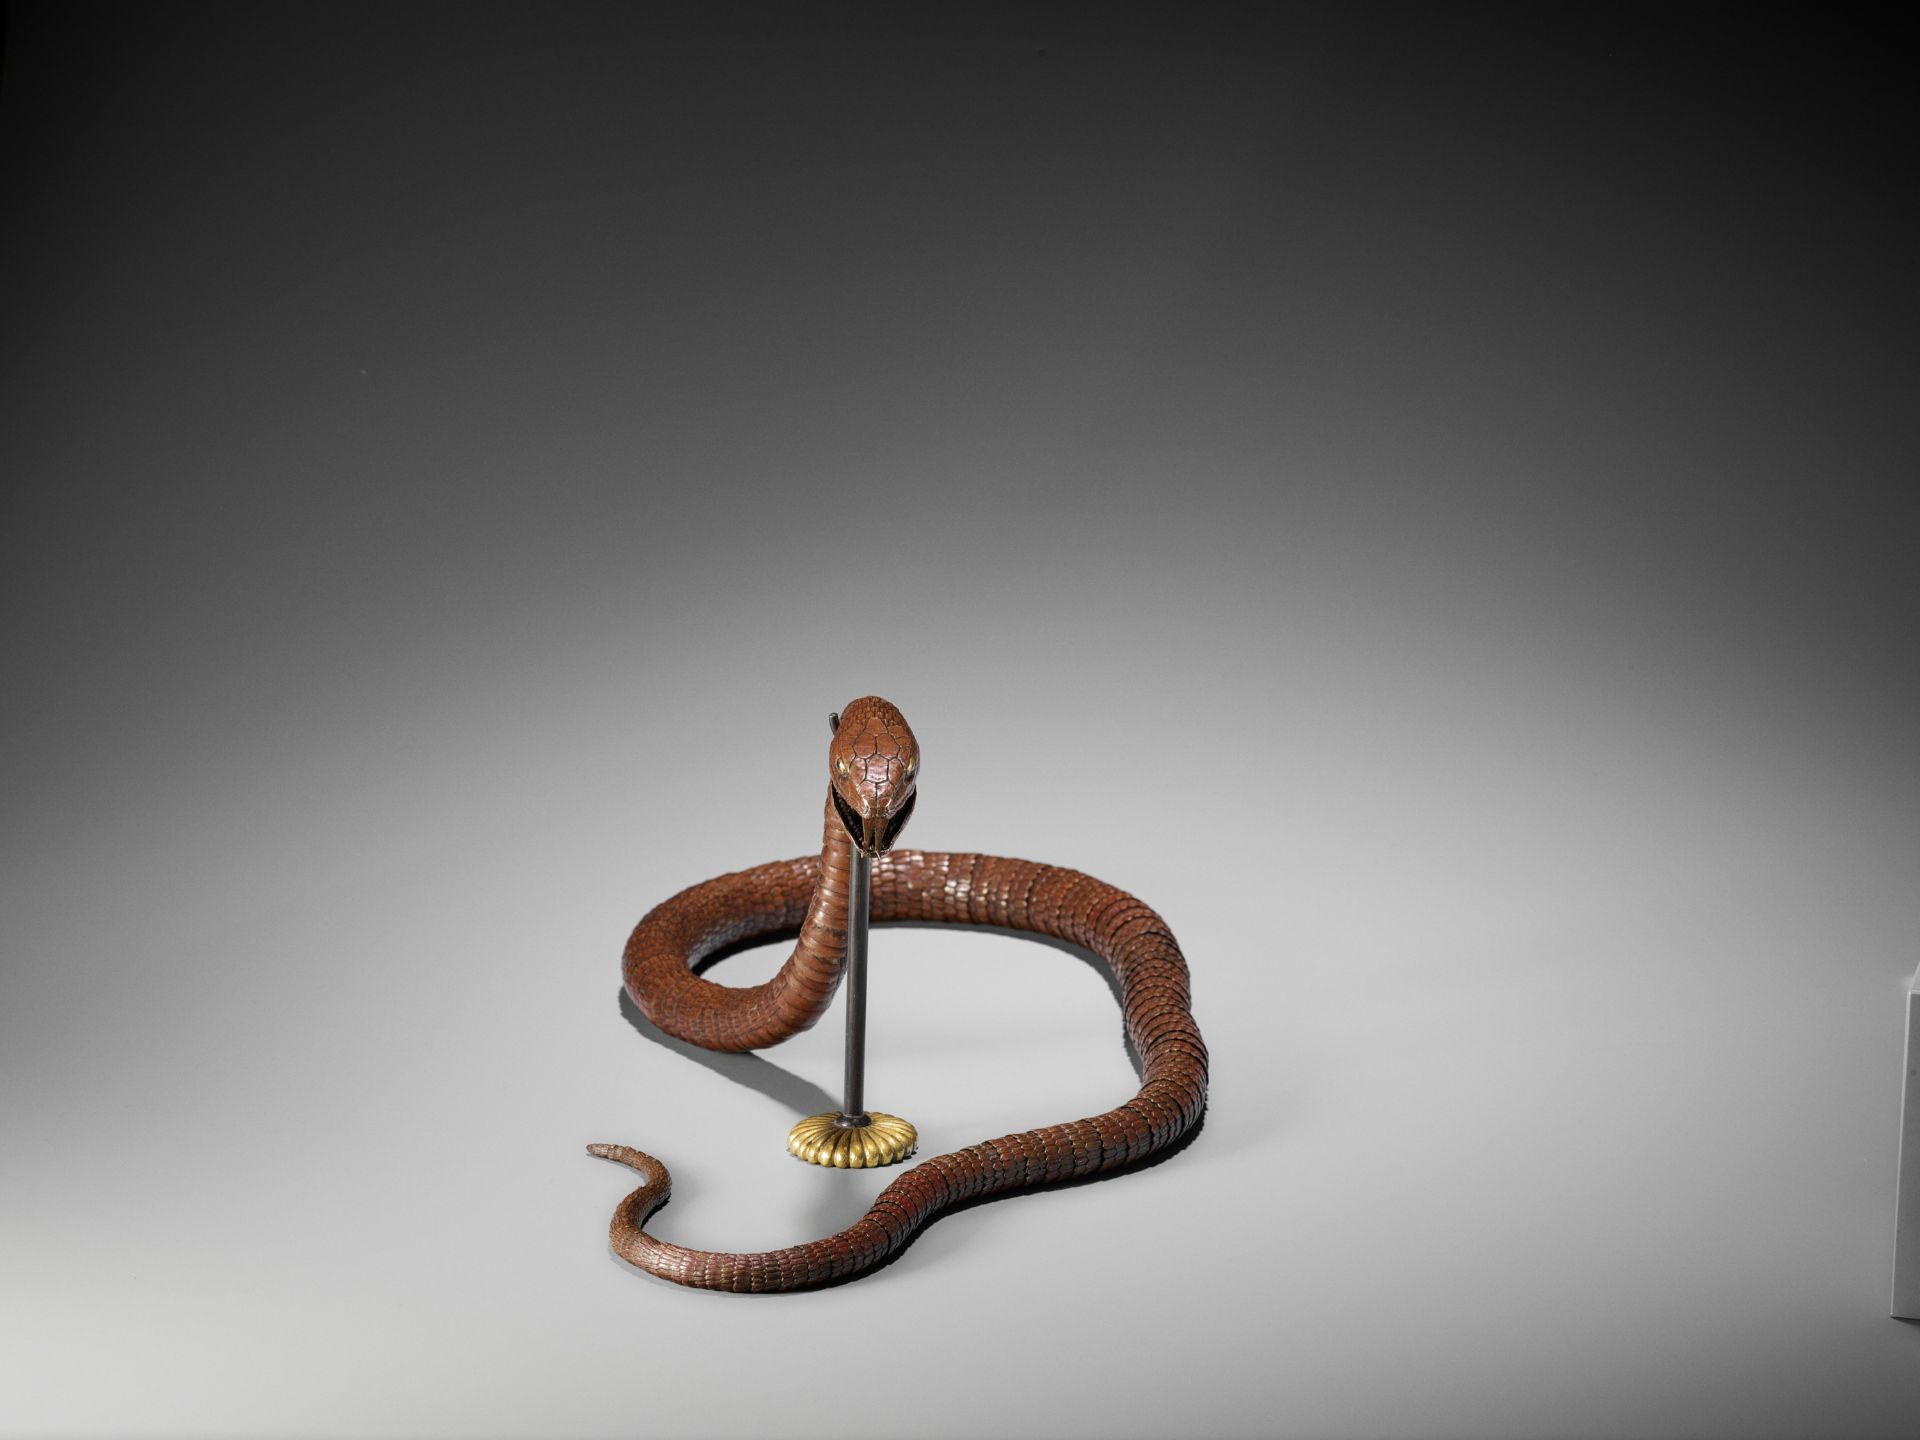 A RARE AND IMPRESSIVE PATINATED BRONZE ARTICULATED MODEL OF A SNAKE - Image 4 of 7